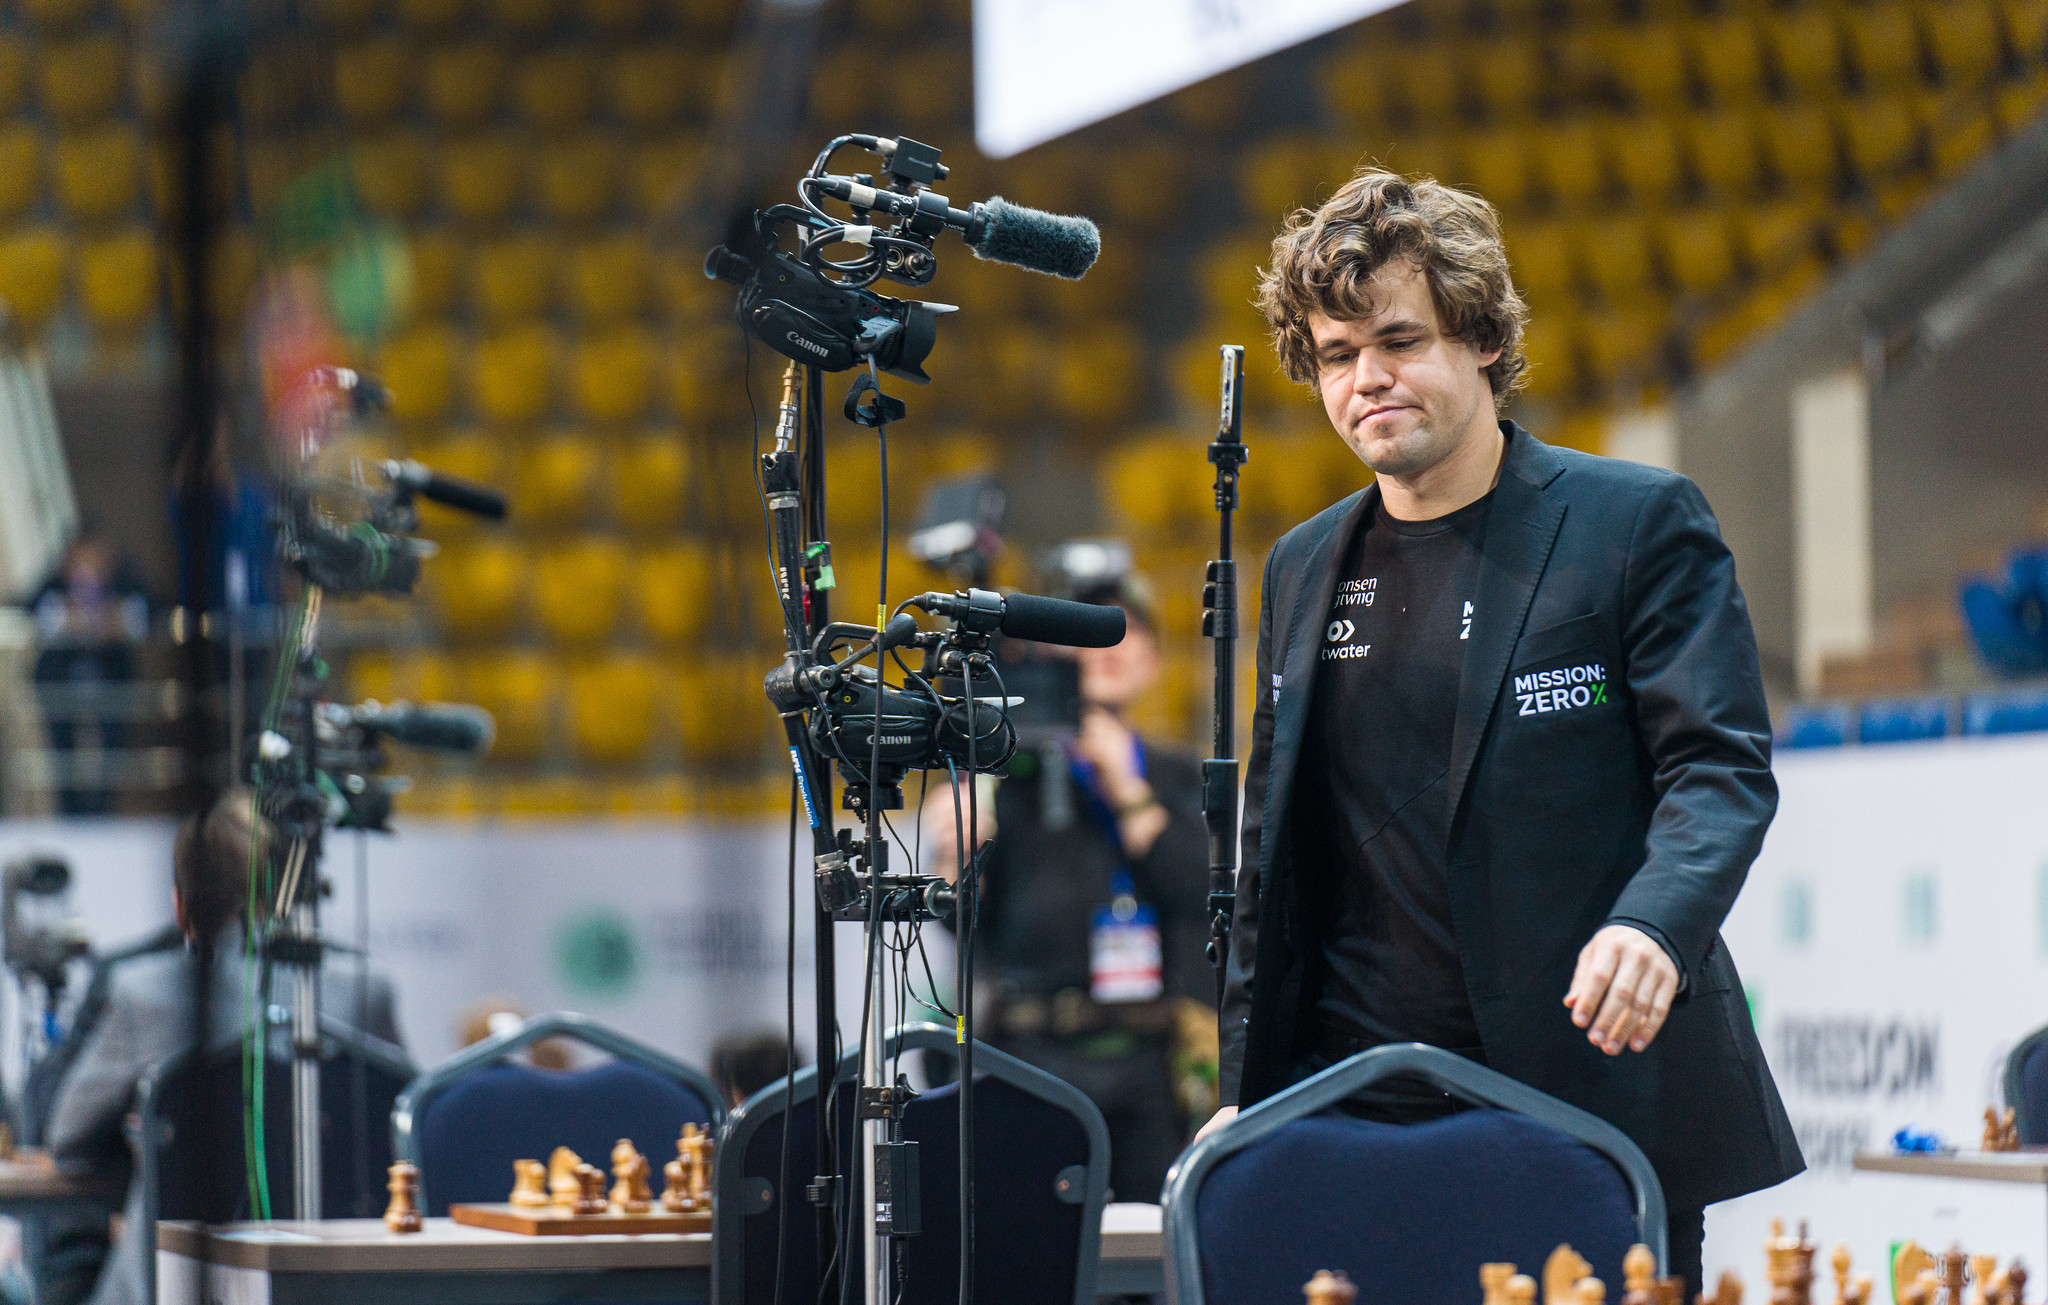 Magnus Carlsen on X: Looking forward to the next event of the Magnus Tour,  Legends&Lunatics of chess / X